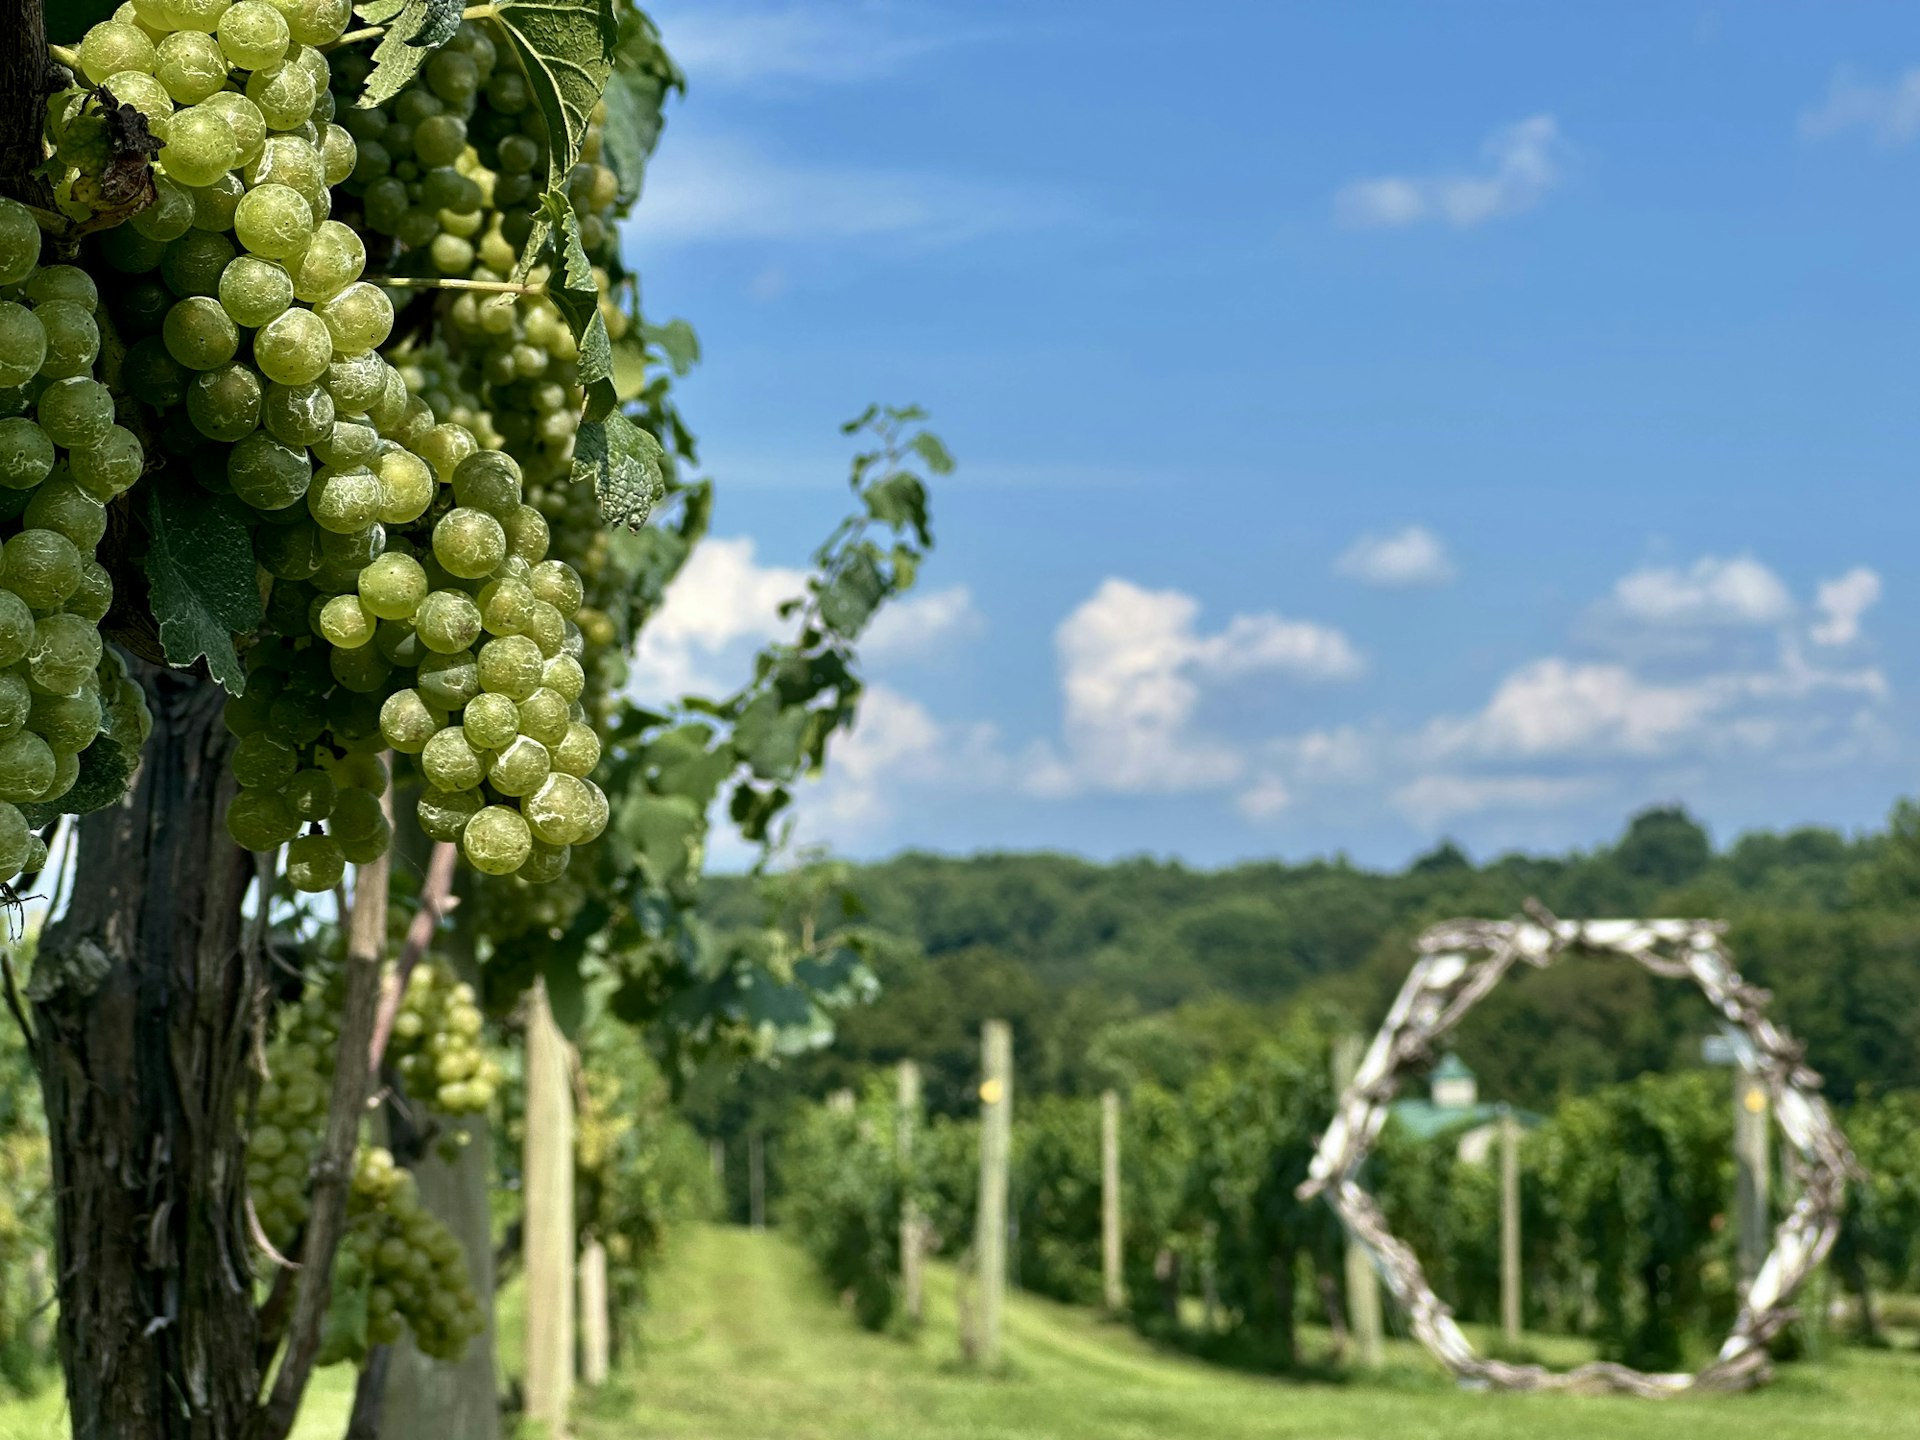 Image of grapes against a lush background at a vineyard in Brandywine Valley